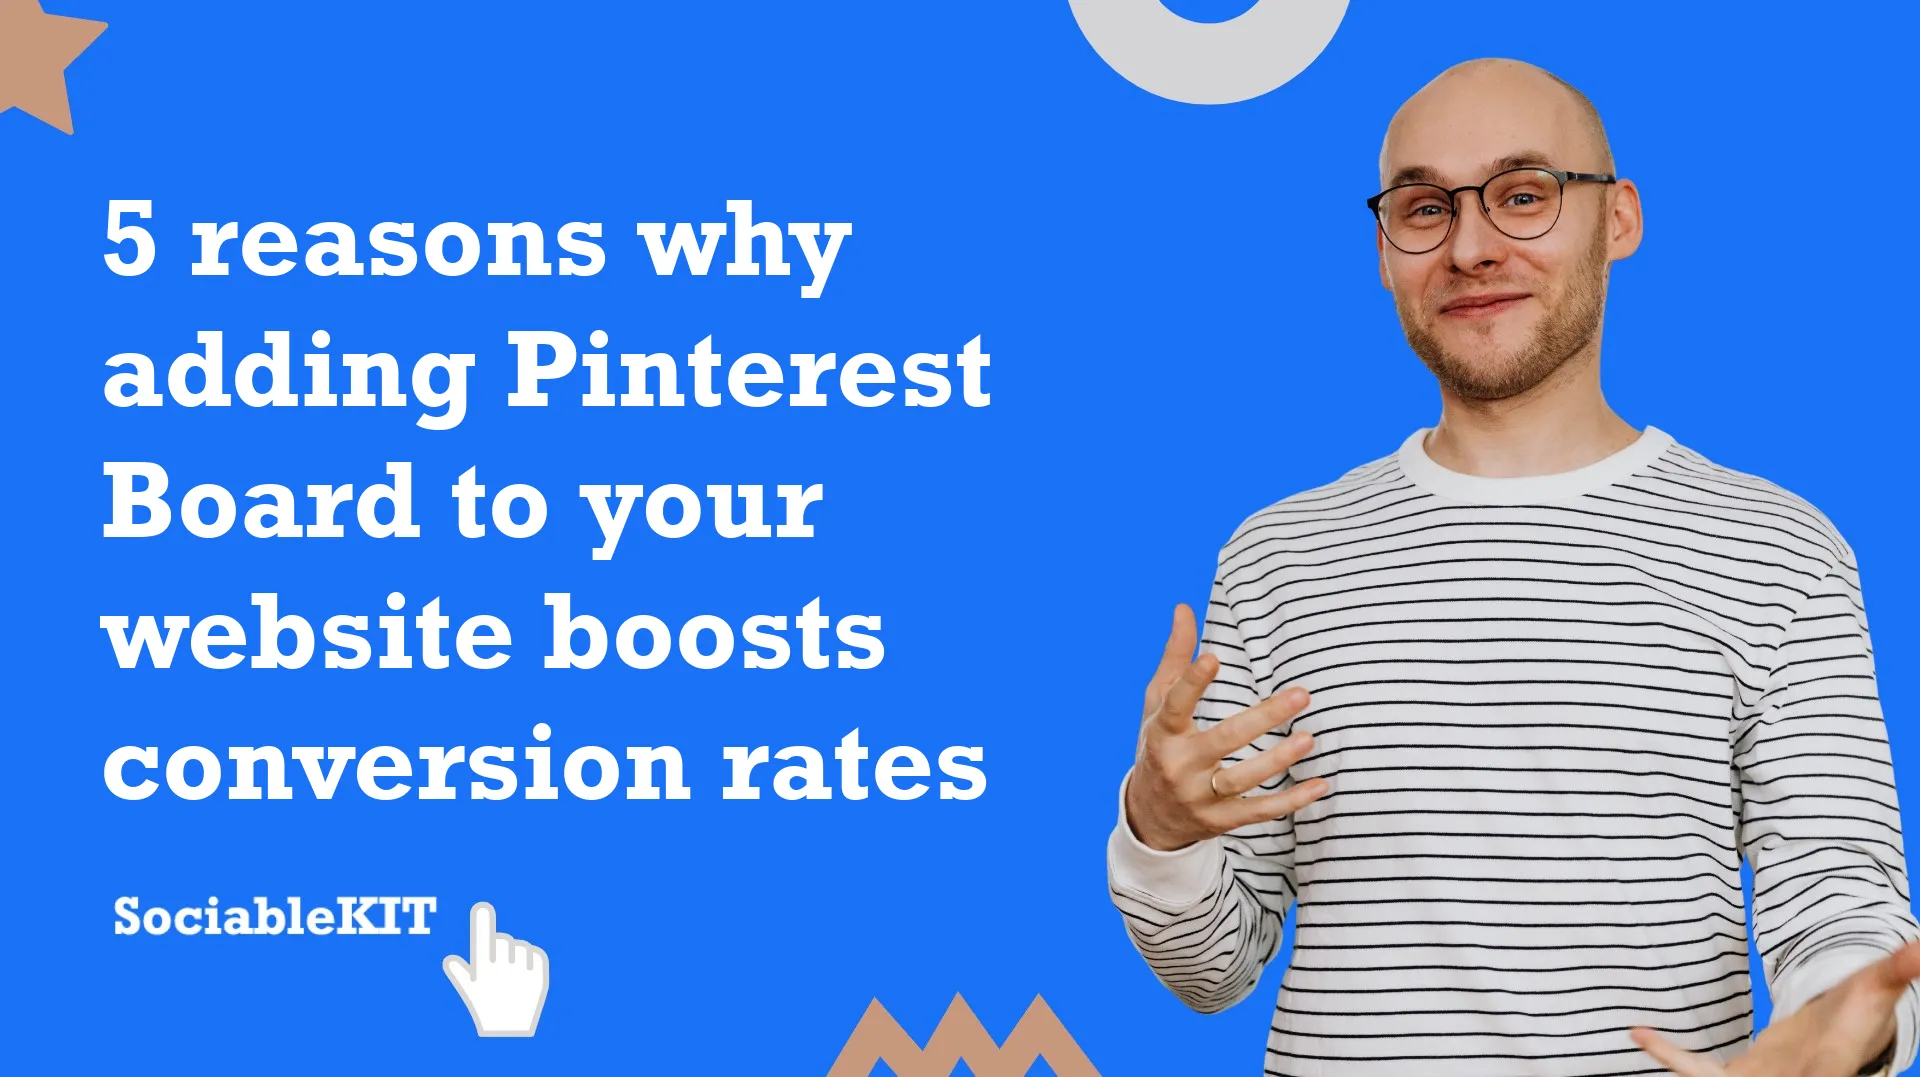 5 reasons why adding Pinterest Board to your website boosts conversion rates